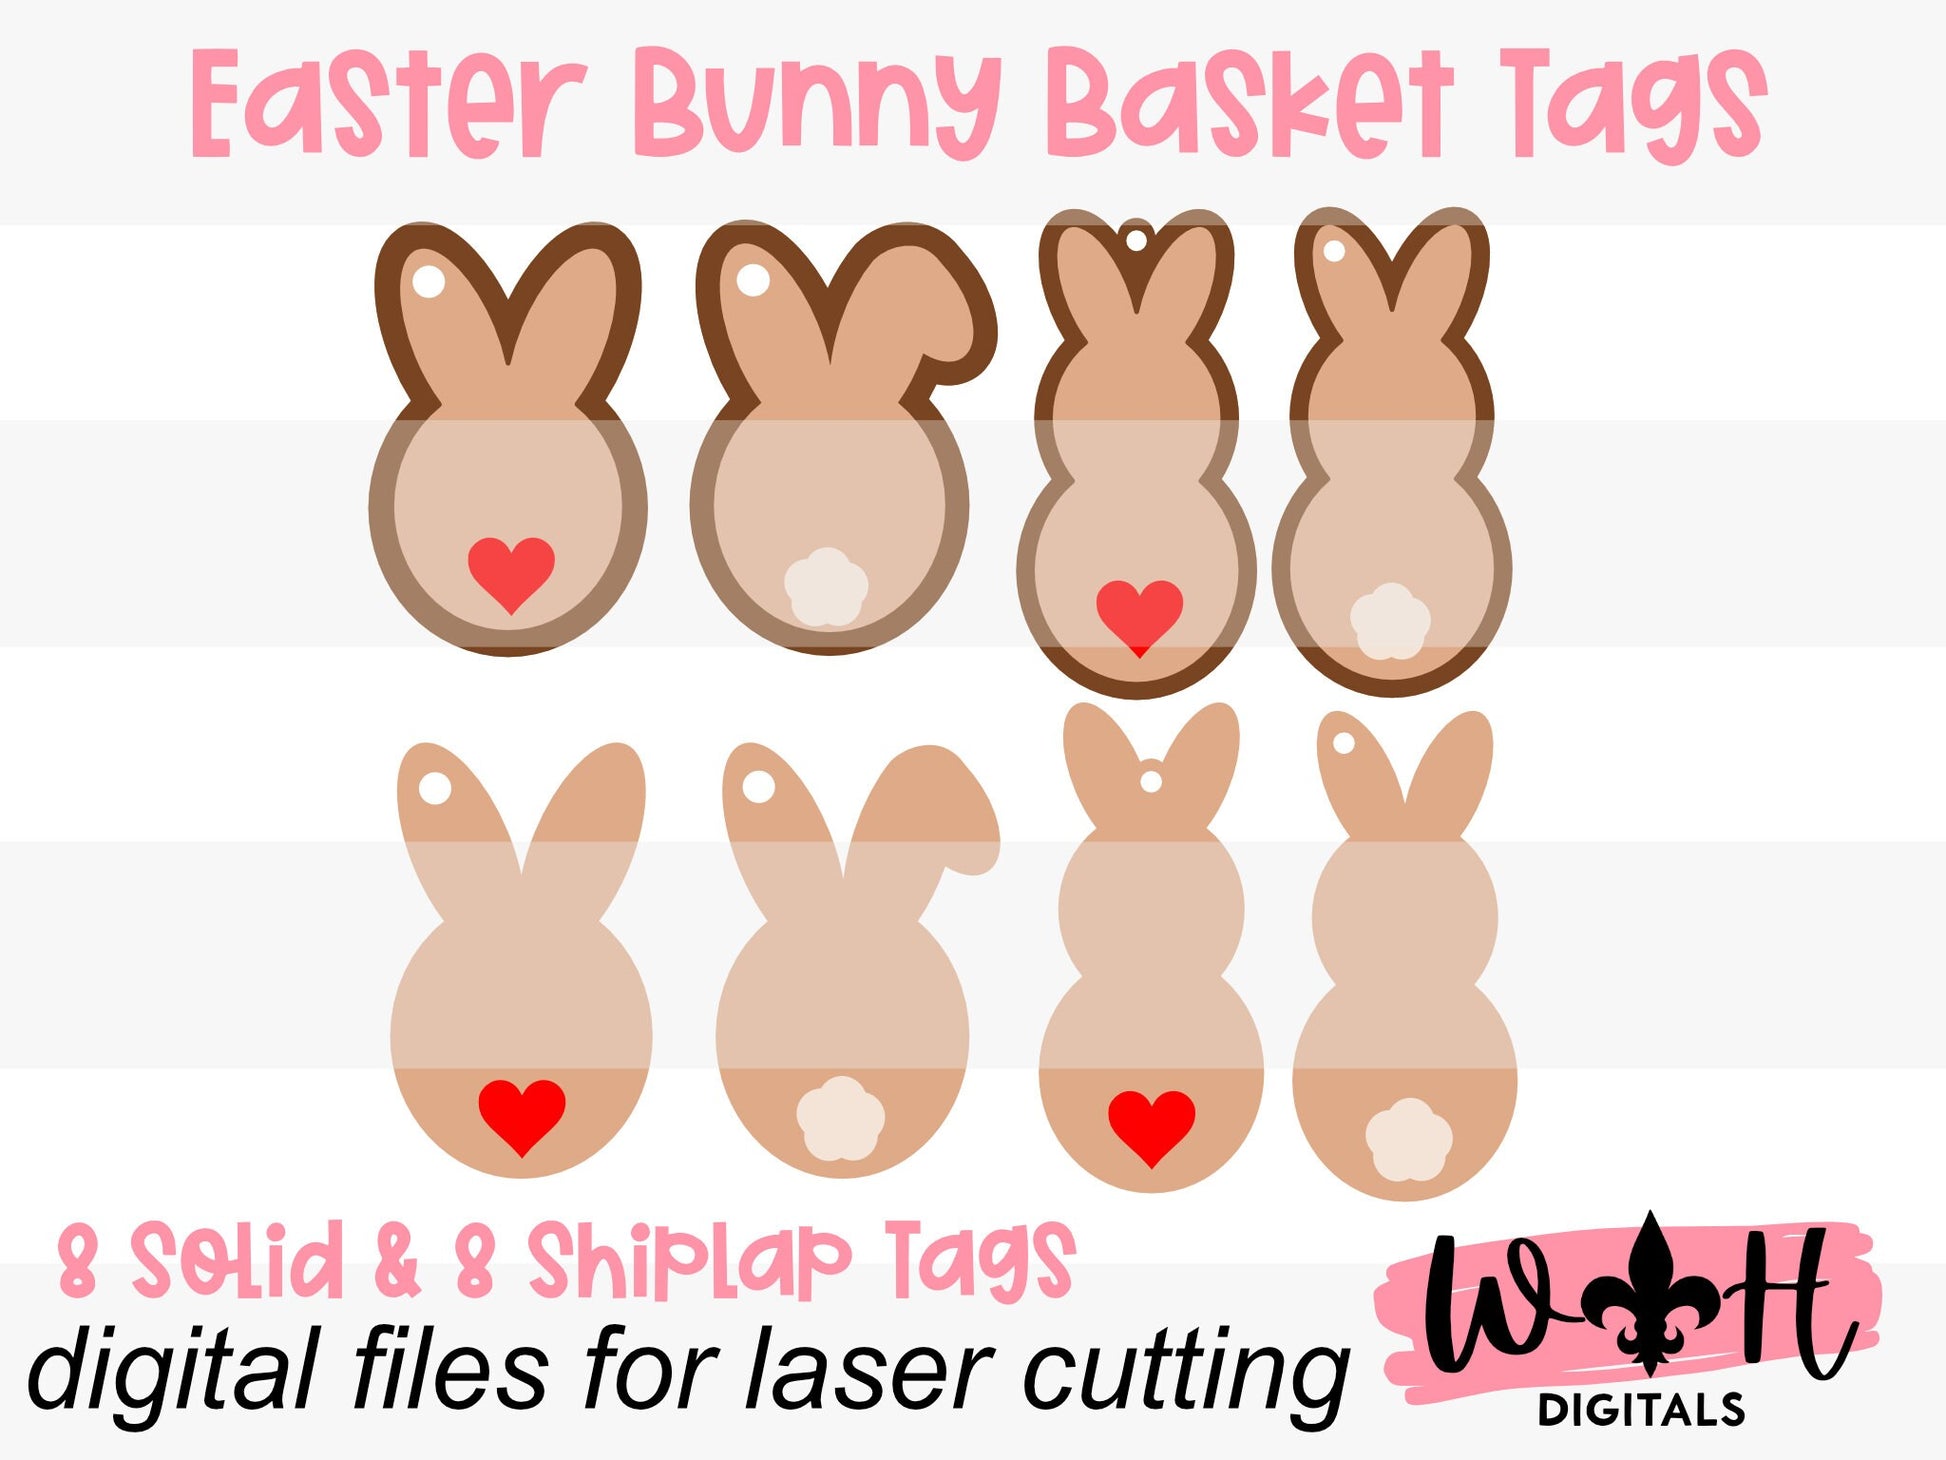 DIGITAL FILE - Easter Bunny Tag Ornaments - Minimal and Layered Style Basket Tags - SVG Cut File For Glowforge - Cut Files For Lasers